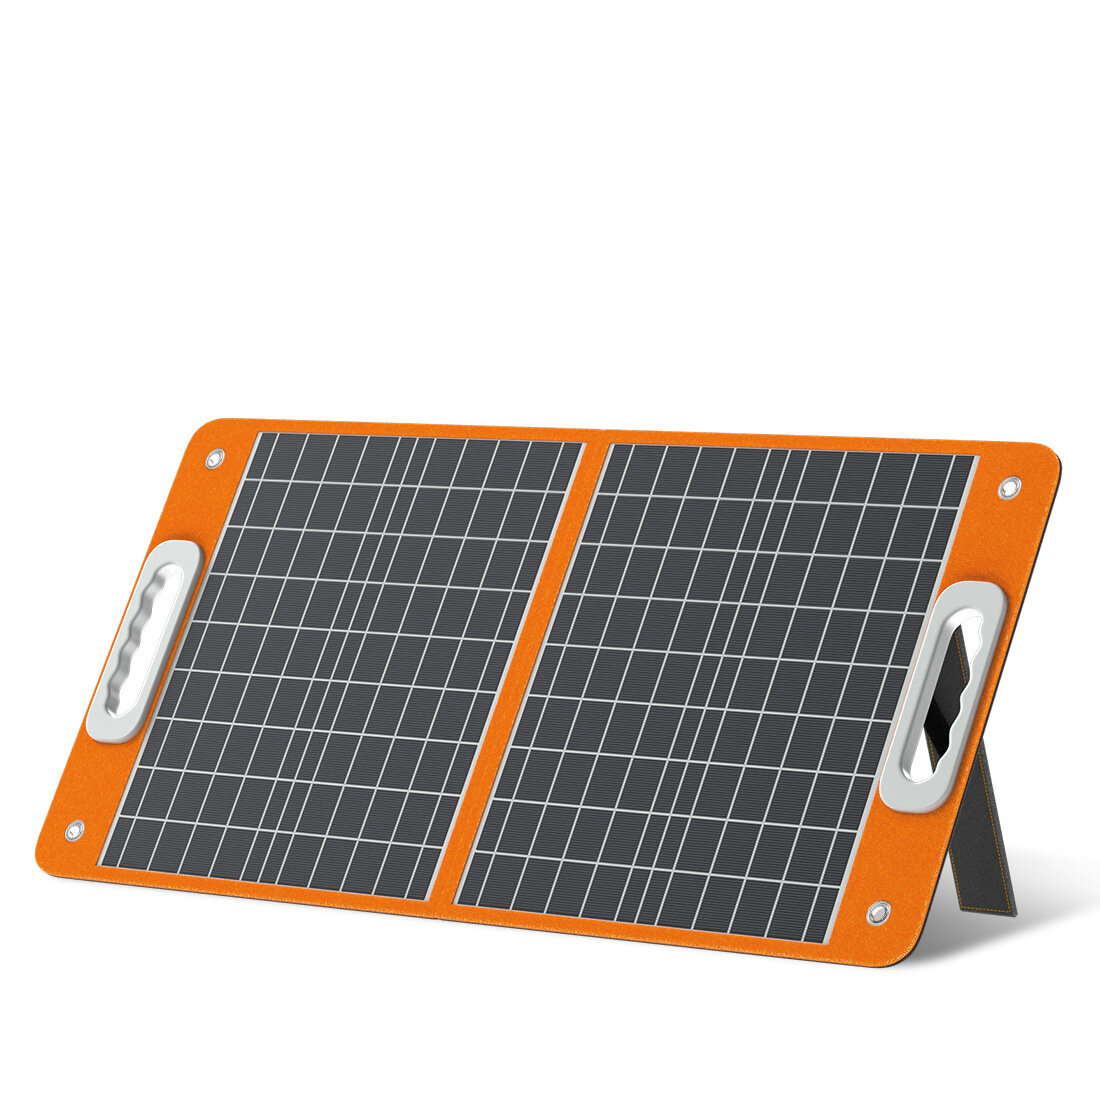 [US Direct] Flashfish 18V 60W Foldable Solar Panel Portable Solar Charger with DC Output USB-C QC3.0 for Phones Tablets Camping Van RV Trip